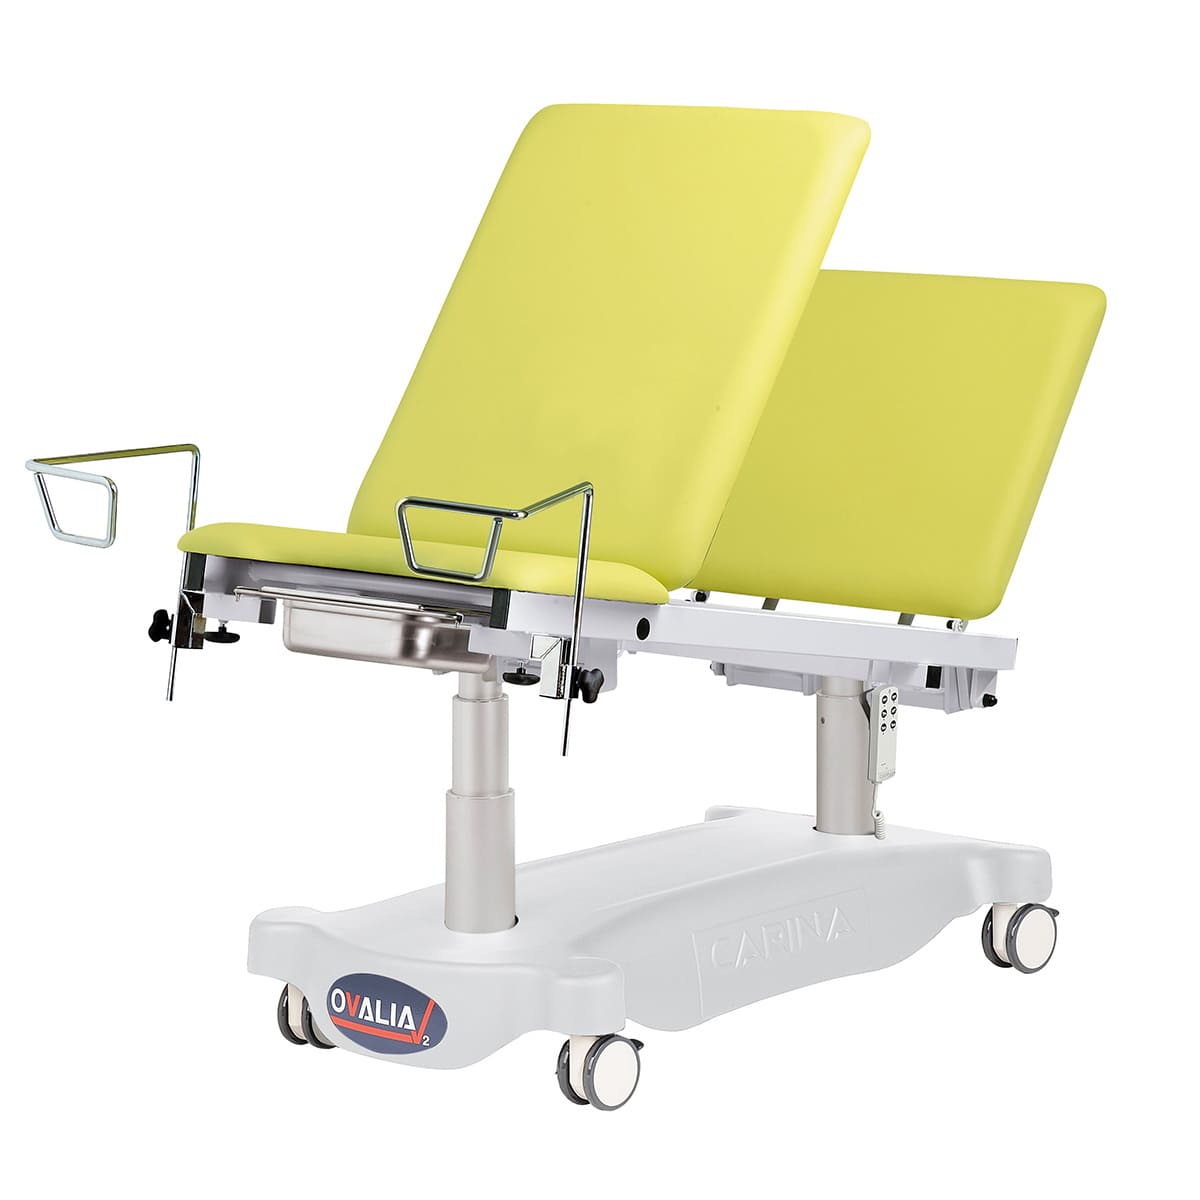 Examination couch width 700mm, hand remote